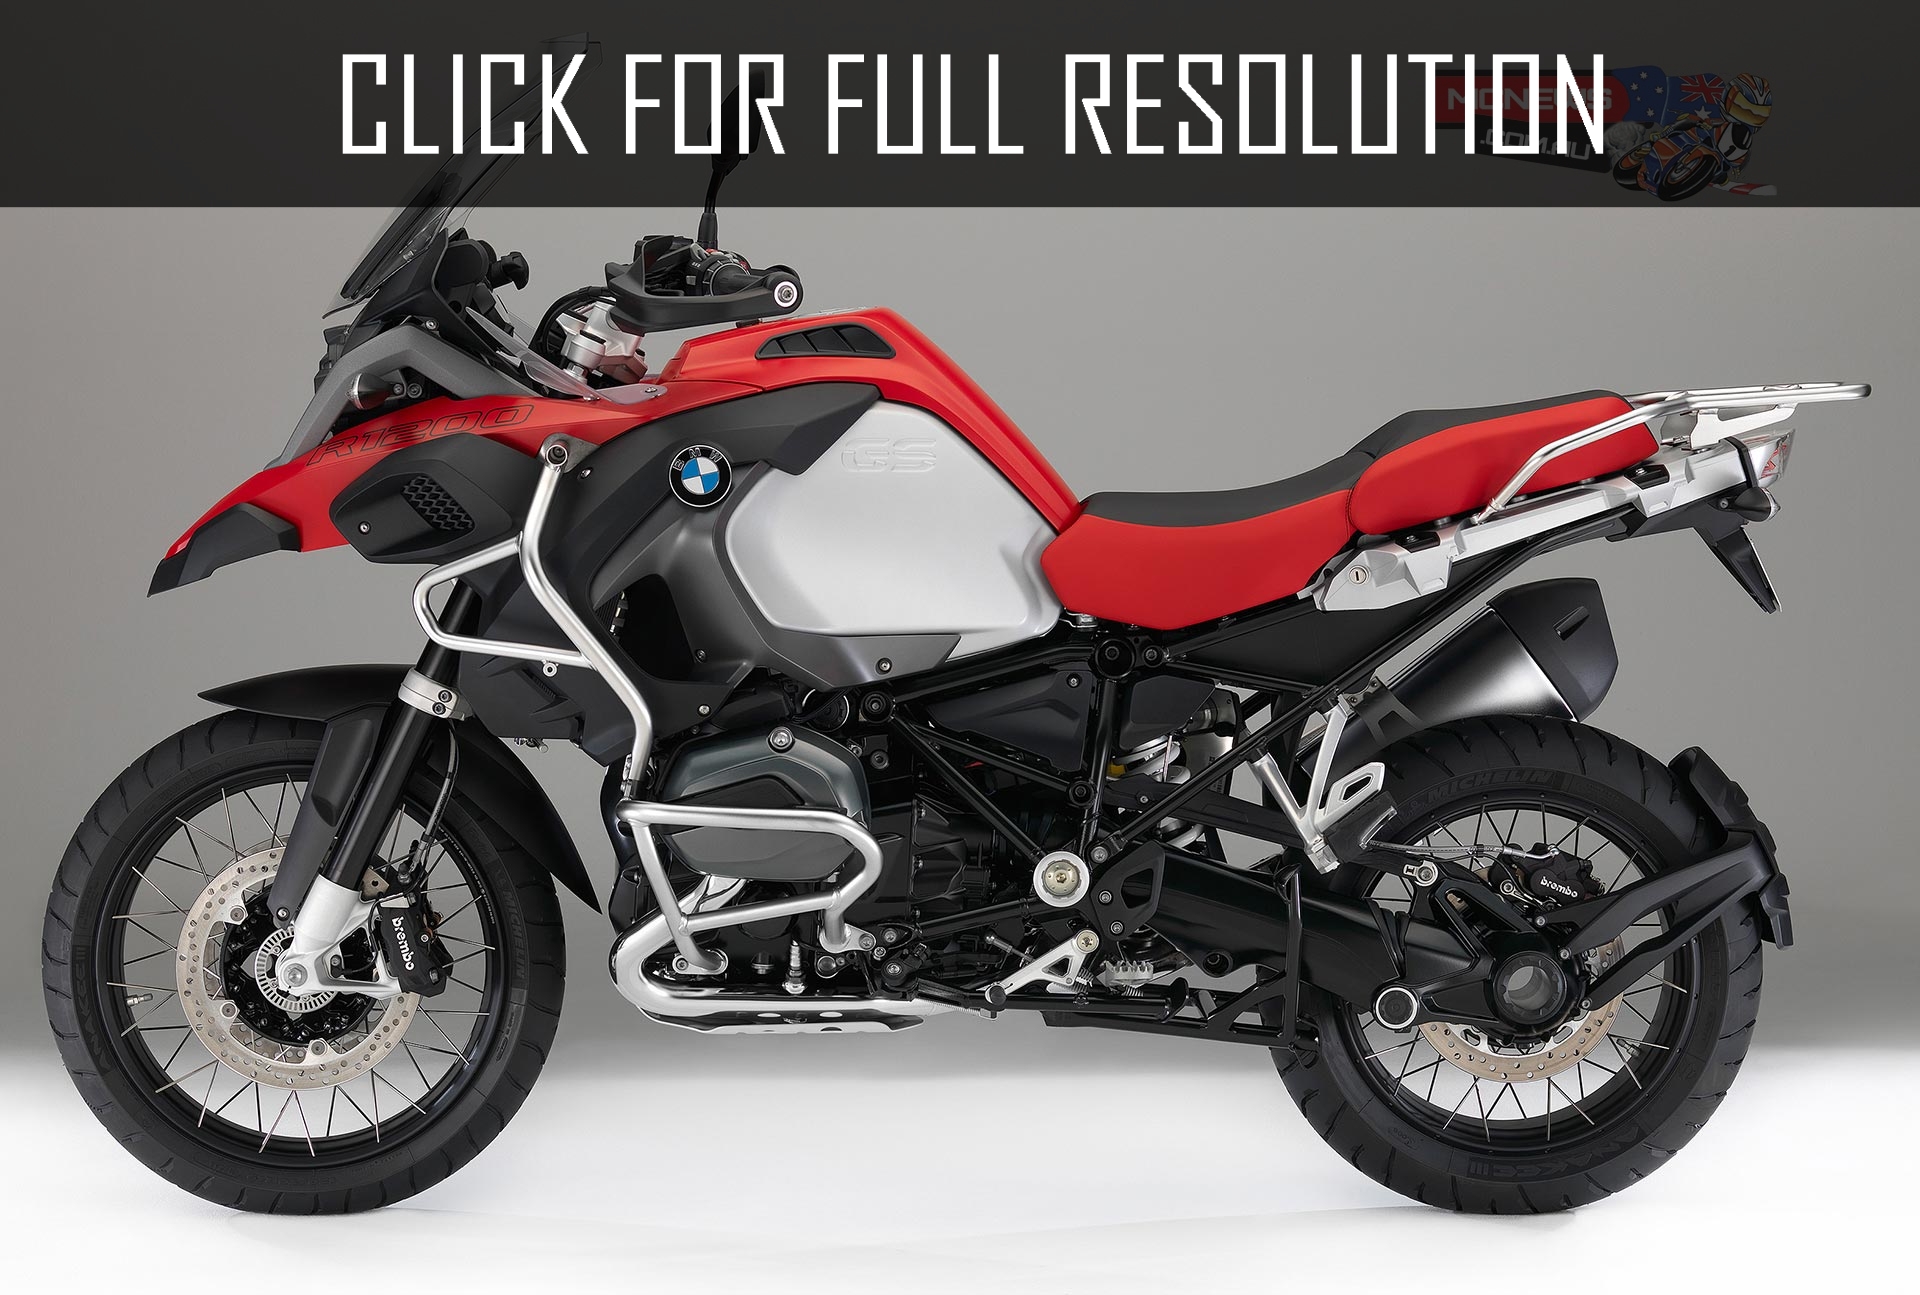 2016 Bmw Gs 1200 Adventure best image gallery 13/20 share and download